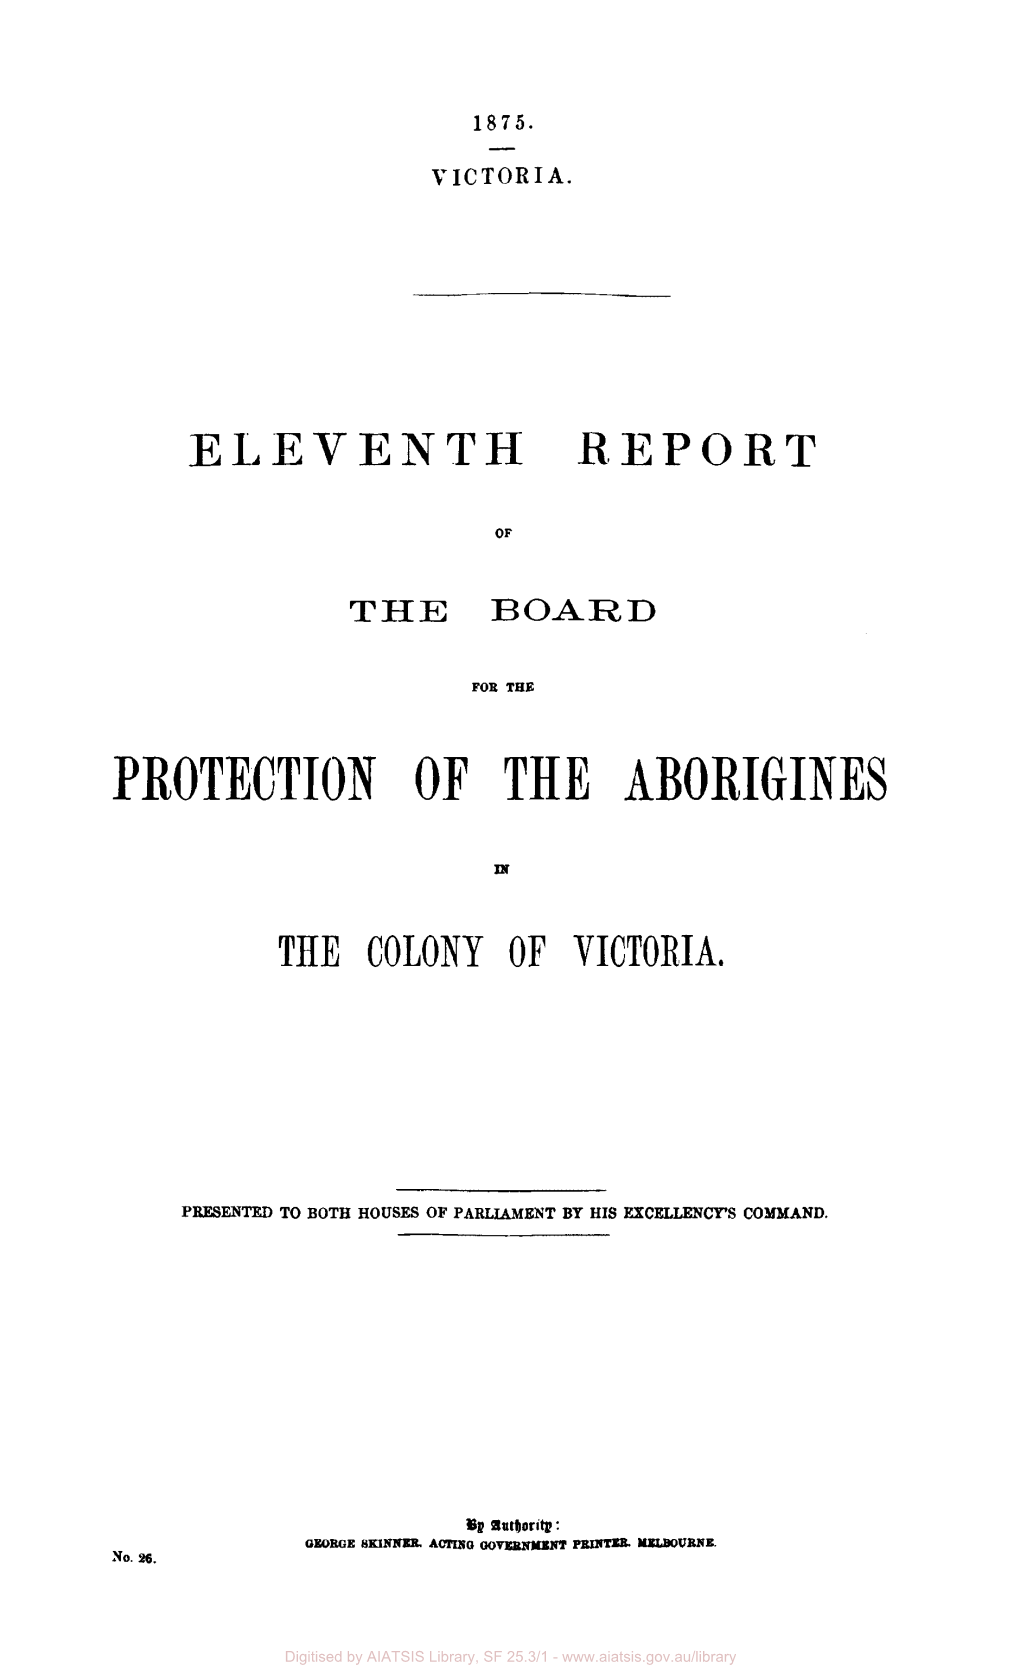 Eleventh Report of the Board for the Protection of the Aborigines in The